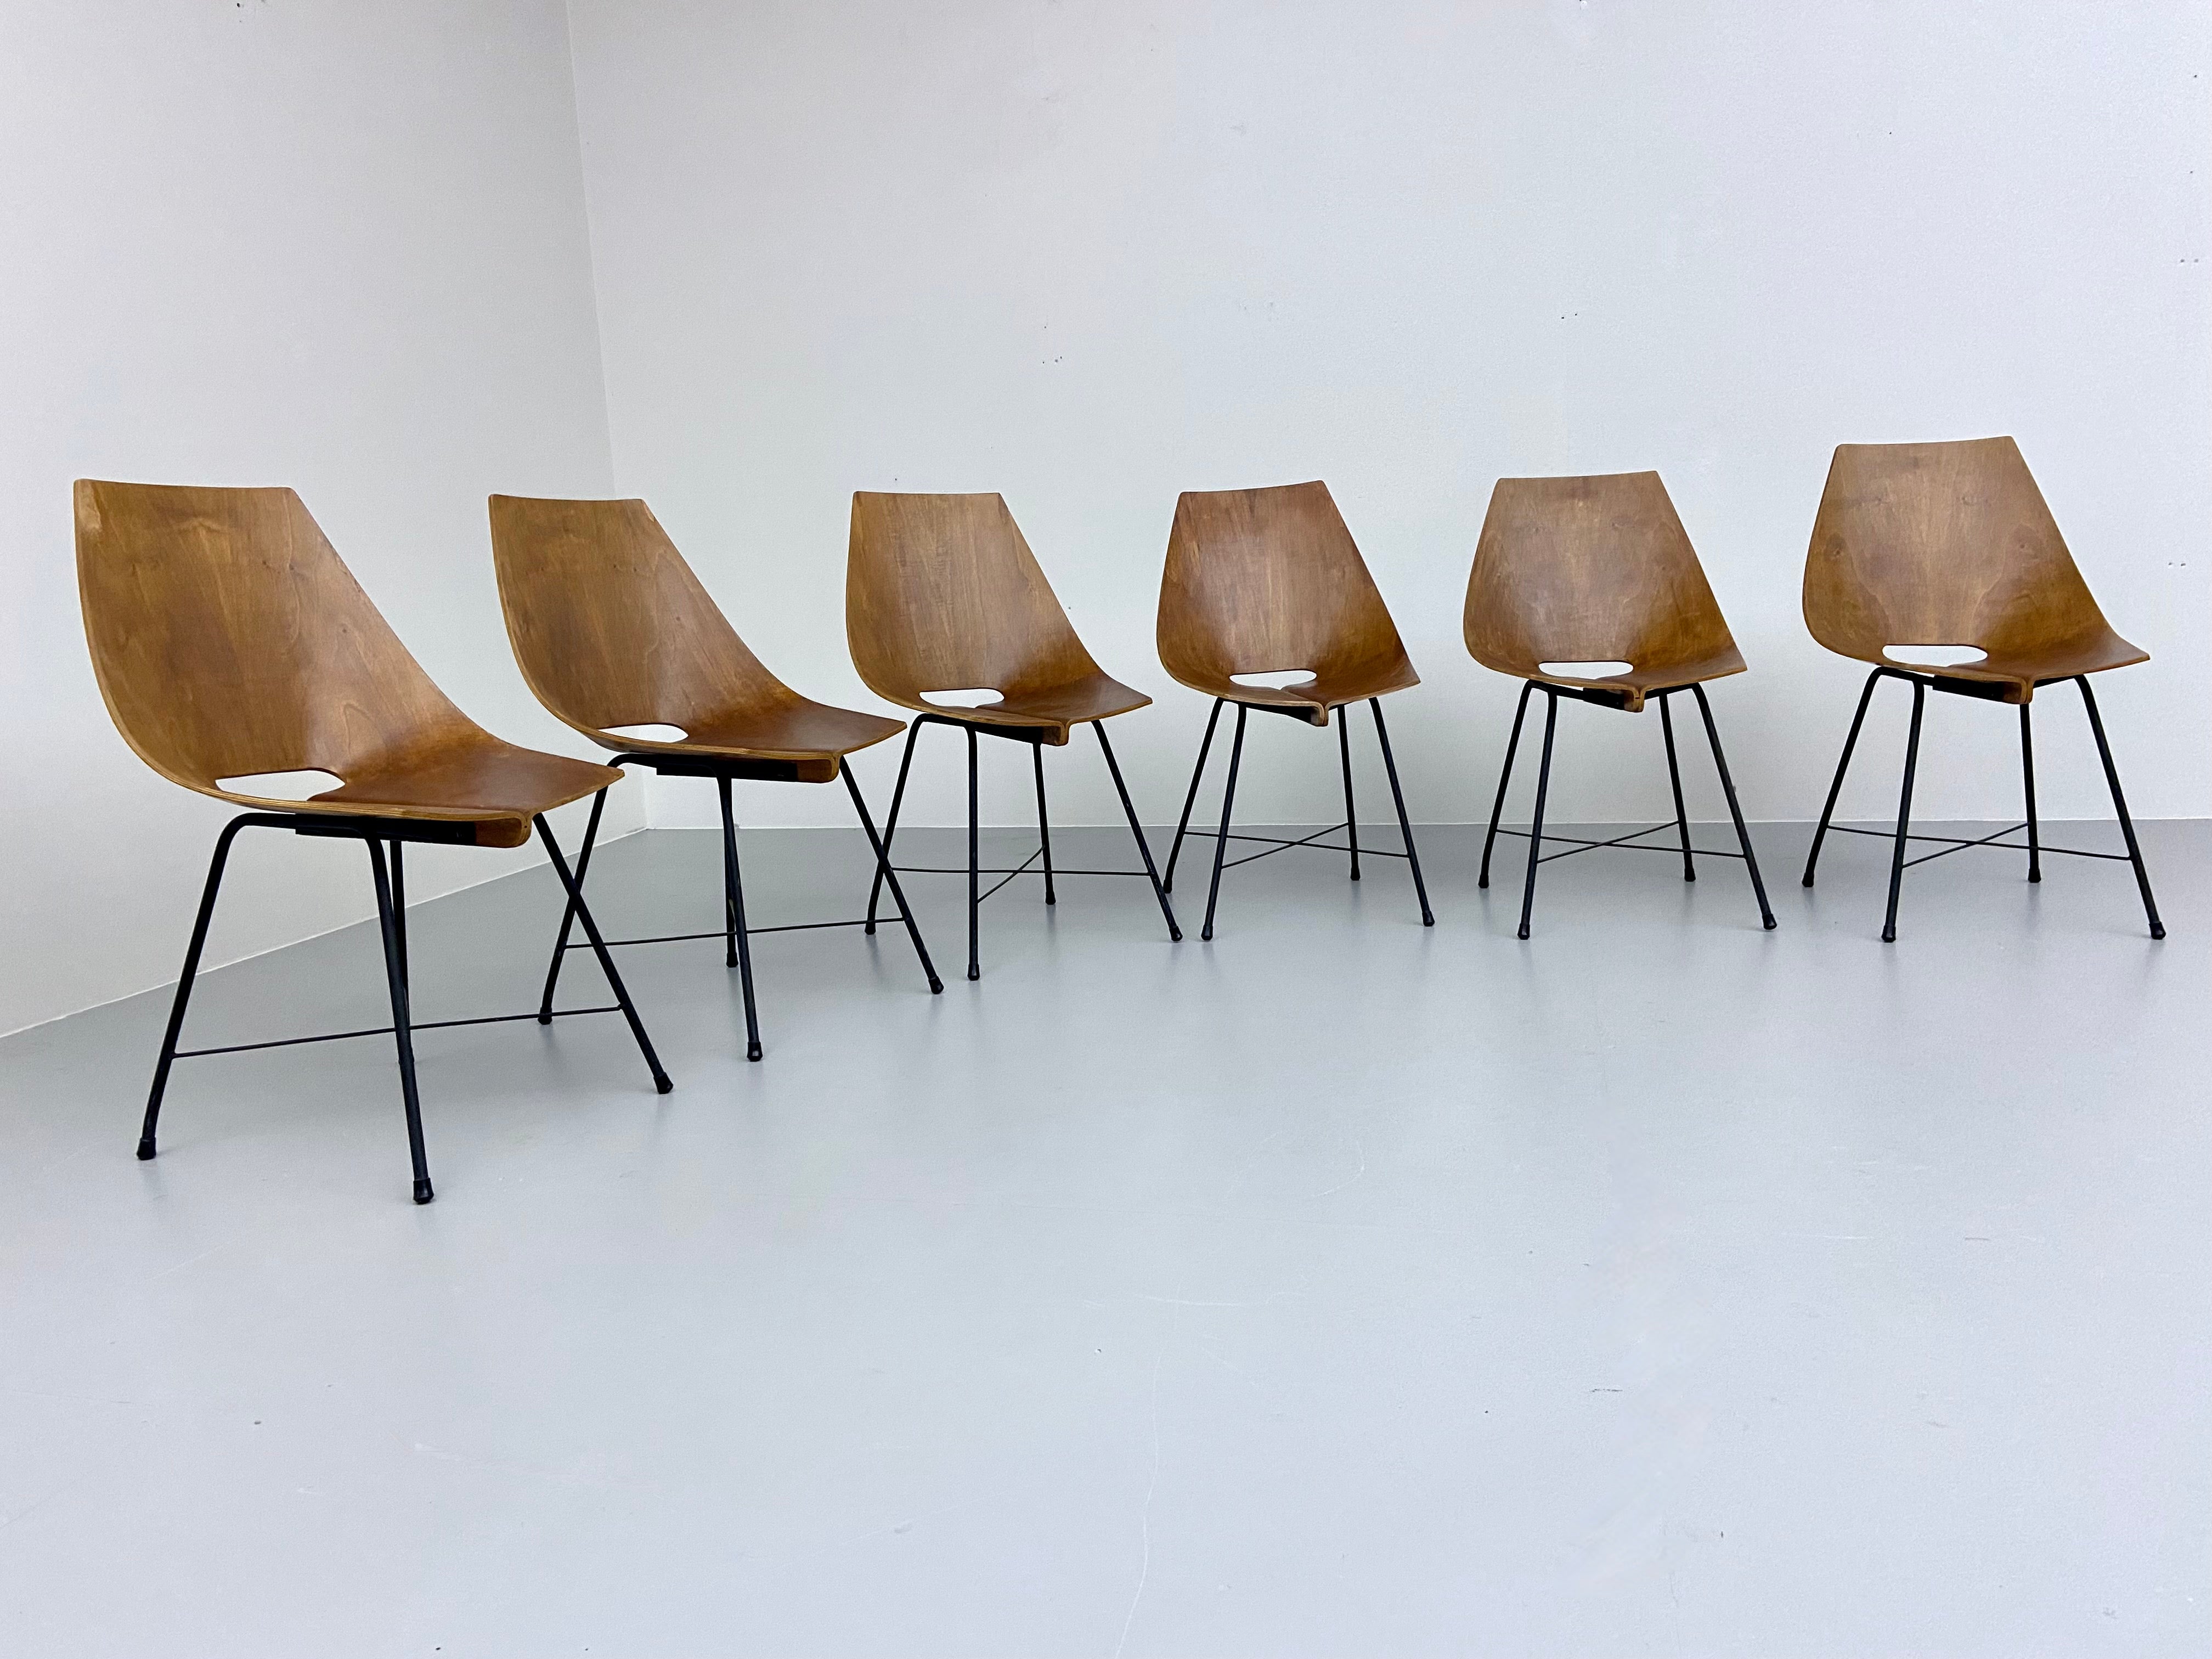 We fully restored this set by adding new small pieces of veneer (where needed) to all the chairs and lacquering them three times. More than 10% of the veneer had to be replaced. The result is a fully up-cycled set of the famous Carlo Ratti dining